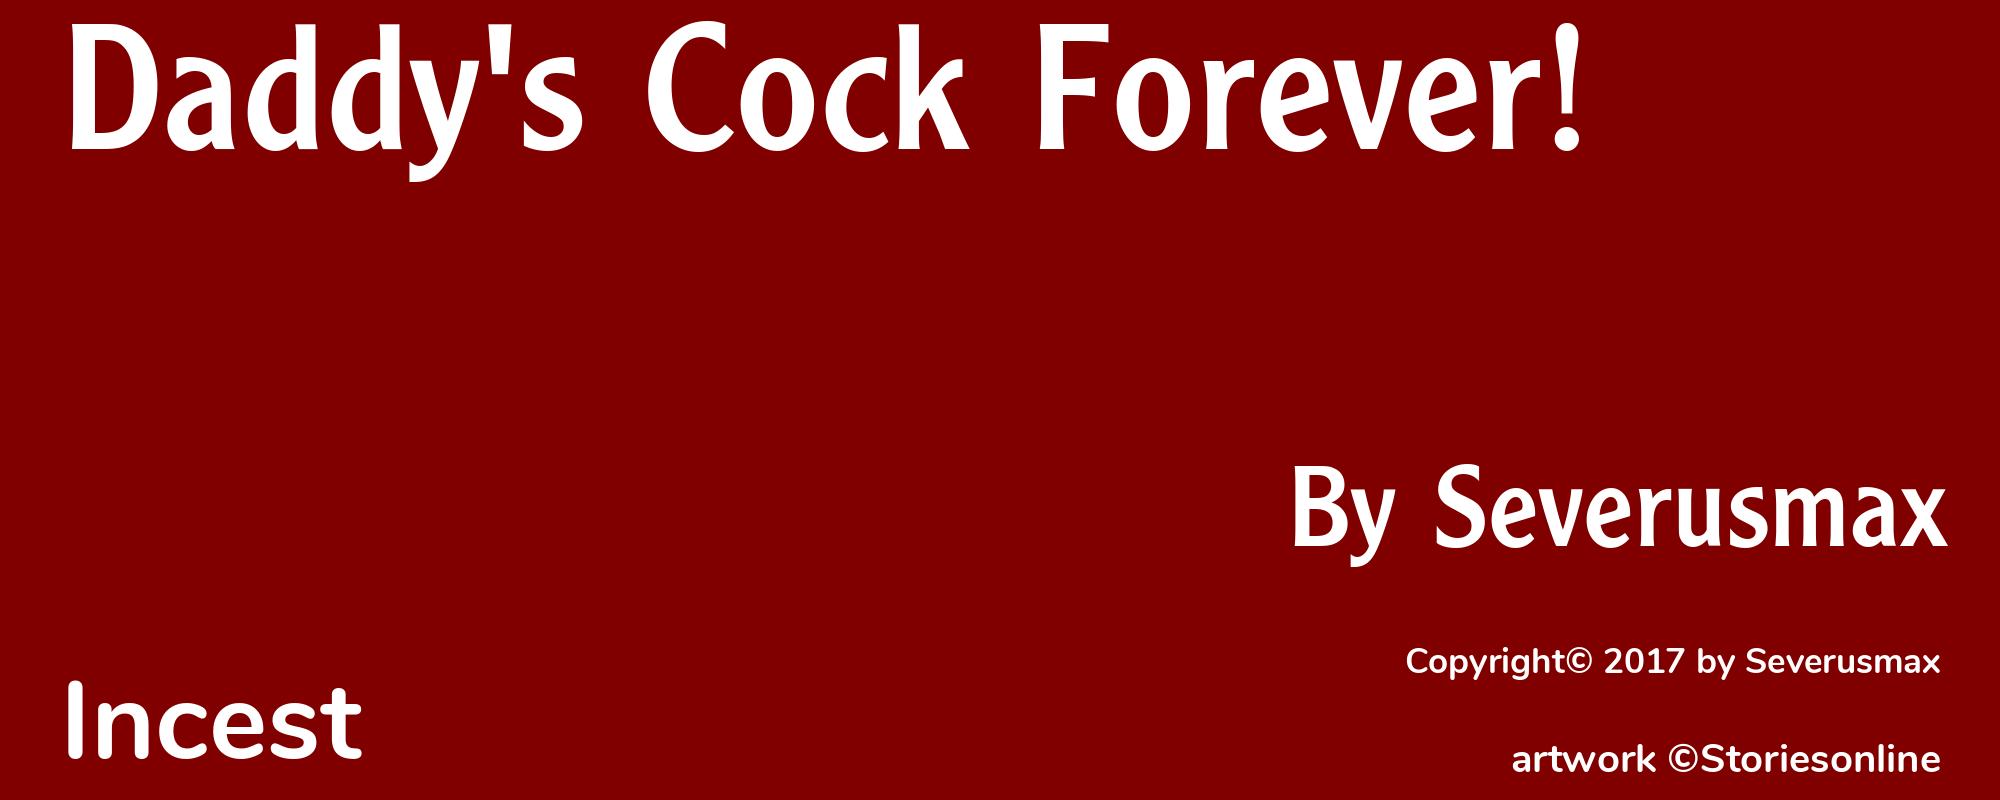 Daddy's Cock Forever! - Cover